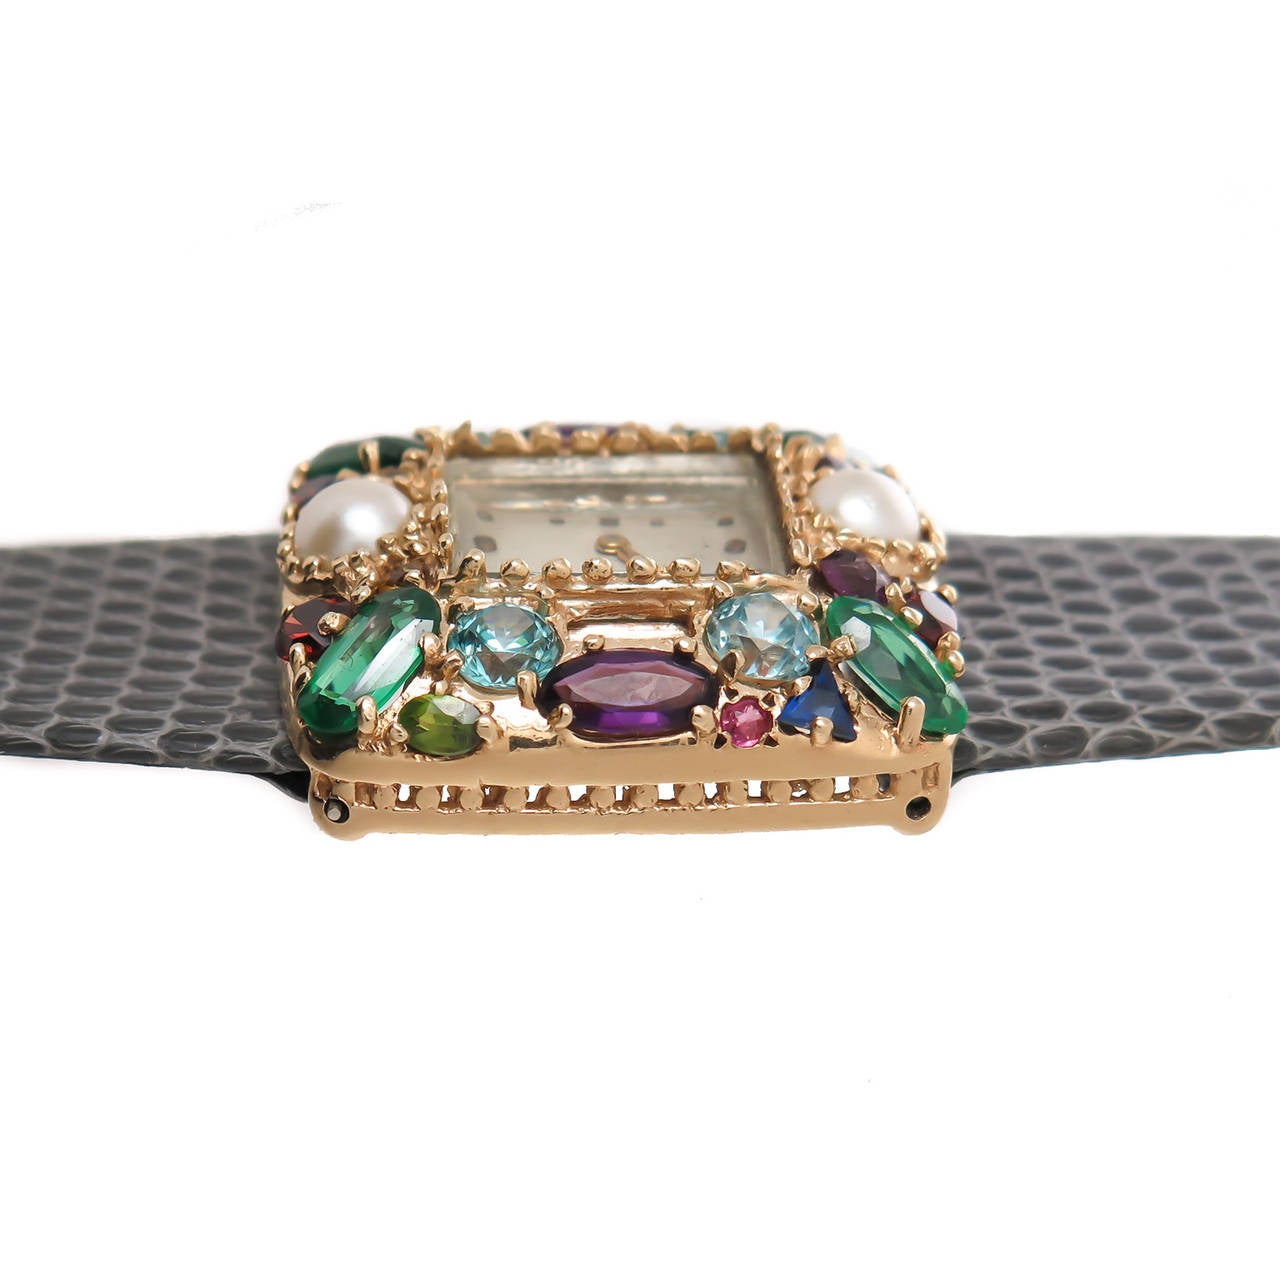 Lucien Piccard lady's 14K yellow gold wristwatch, circa 1950s, set with pearls, garnets, zircons, amethyst and other semi-precious stones. Manual-wind movement. Case measures 1 1/8 X 1. New lizard strap and original 14K Lucien Piccard buckle.